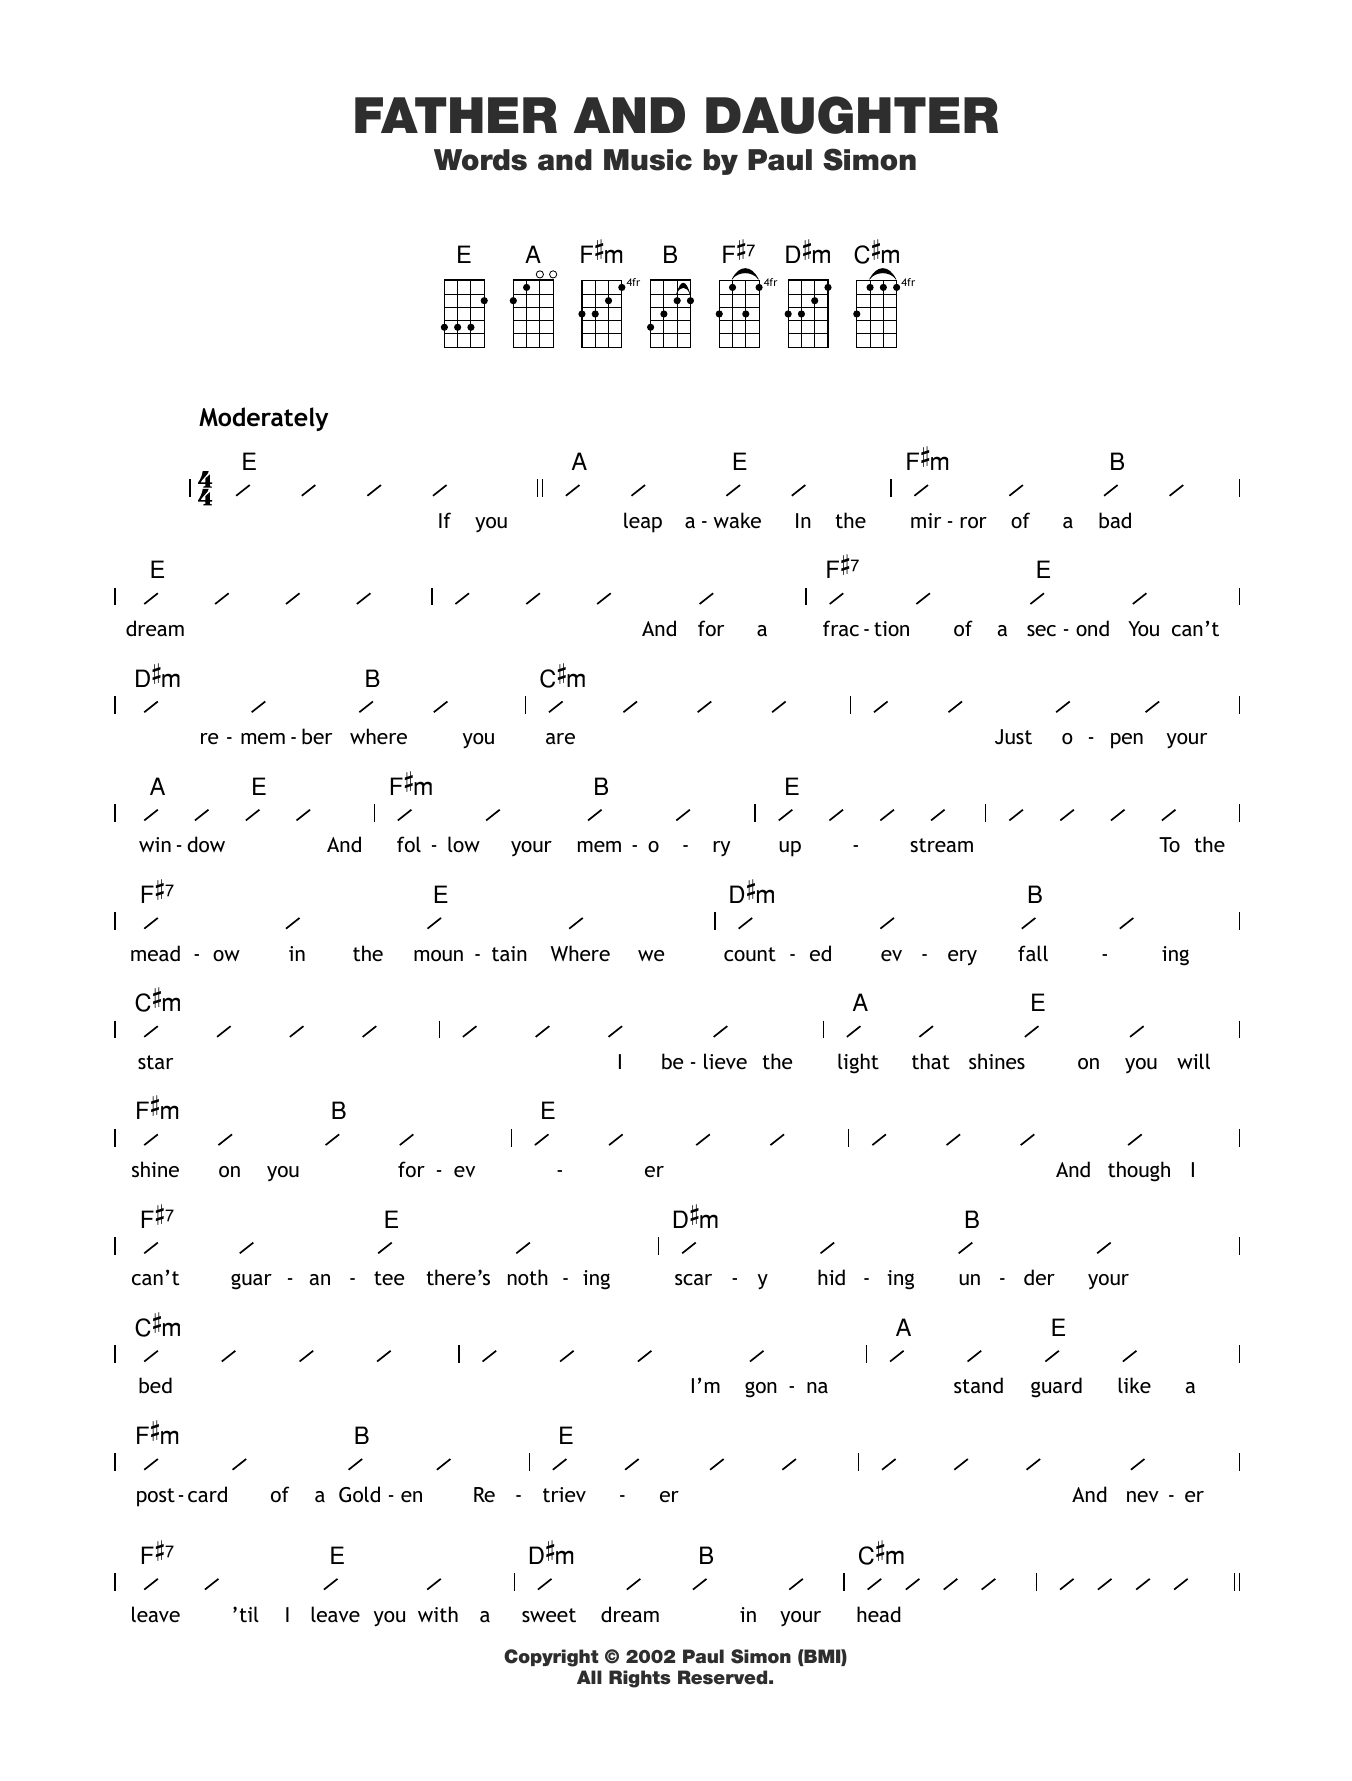 Download Paul Simon Father And Daughter Sheet Music